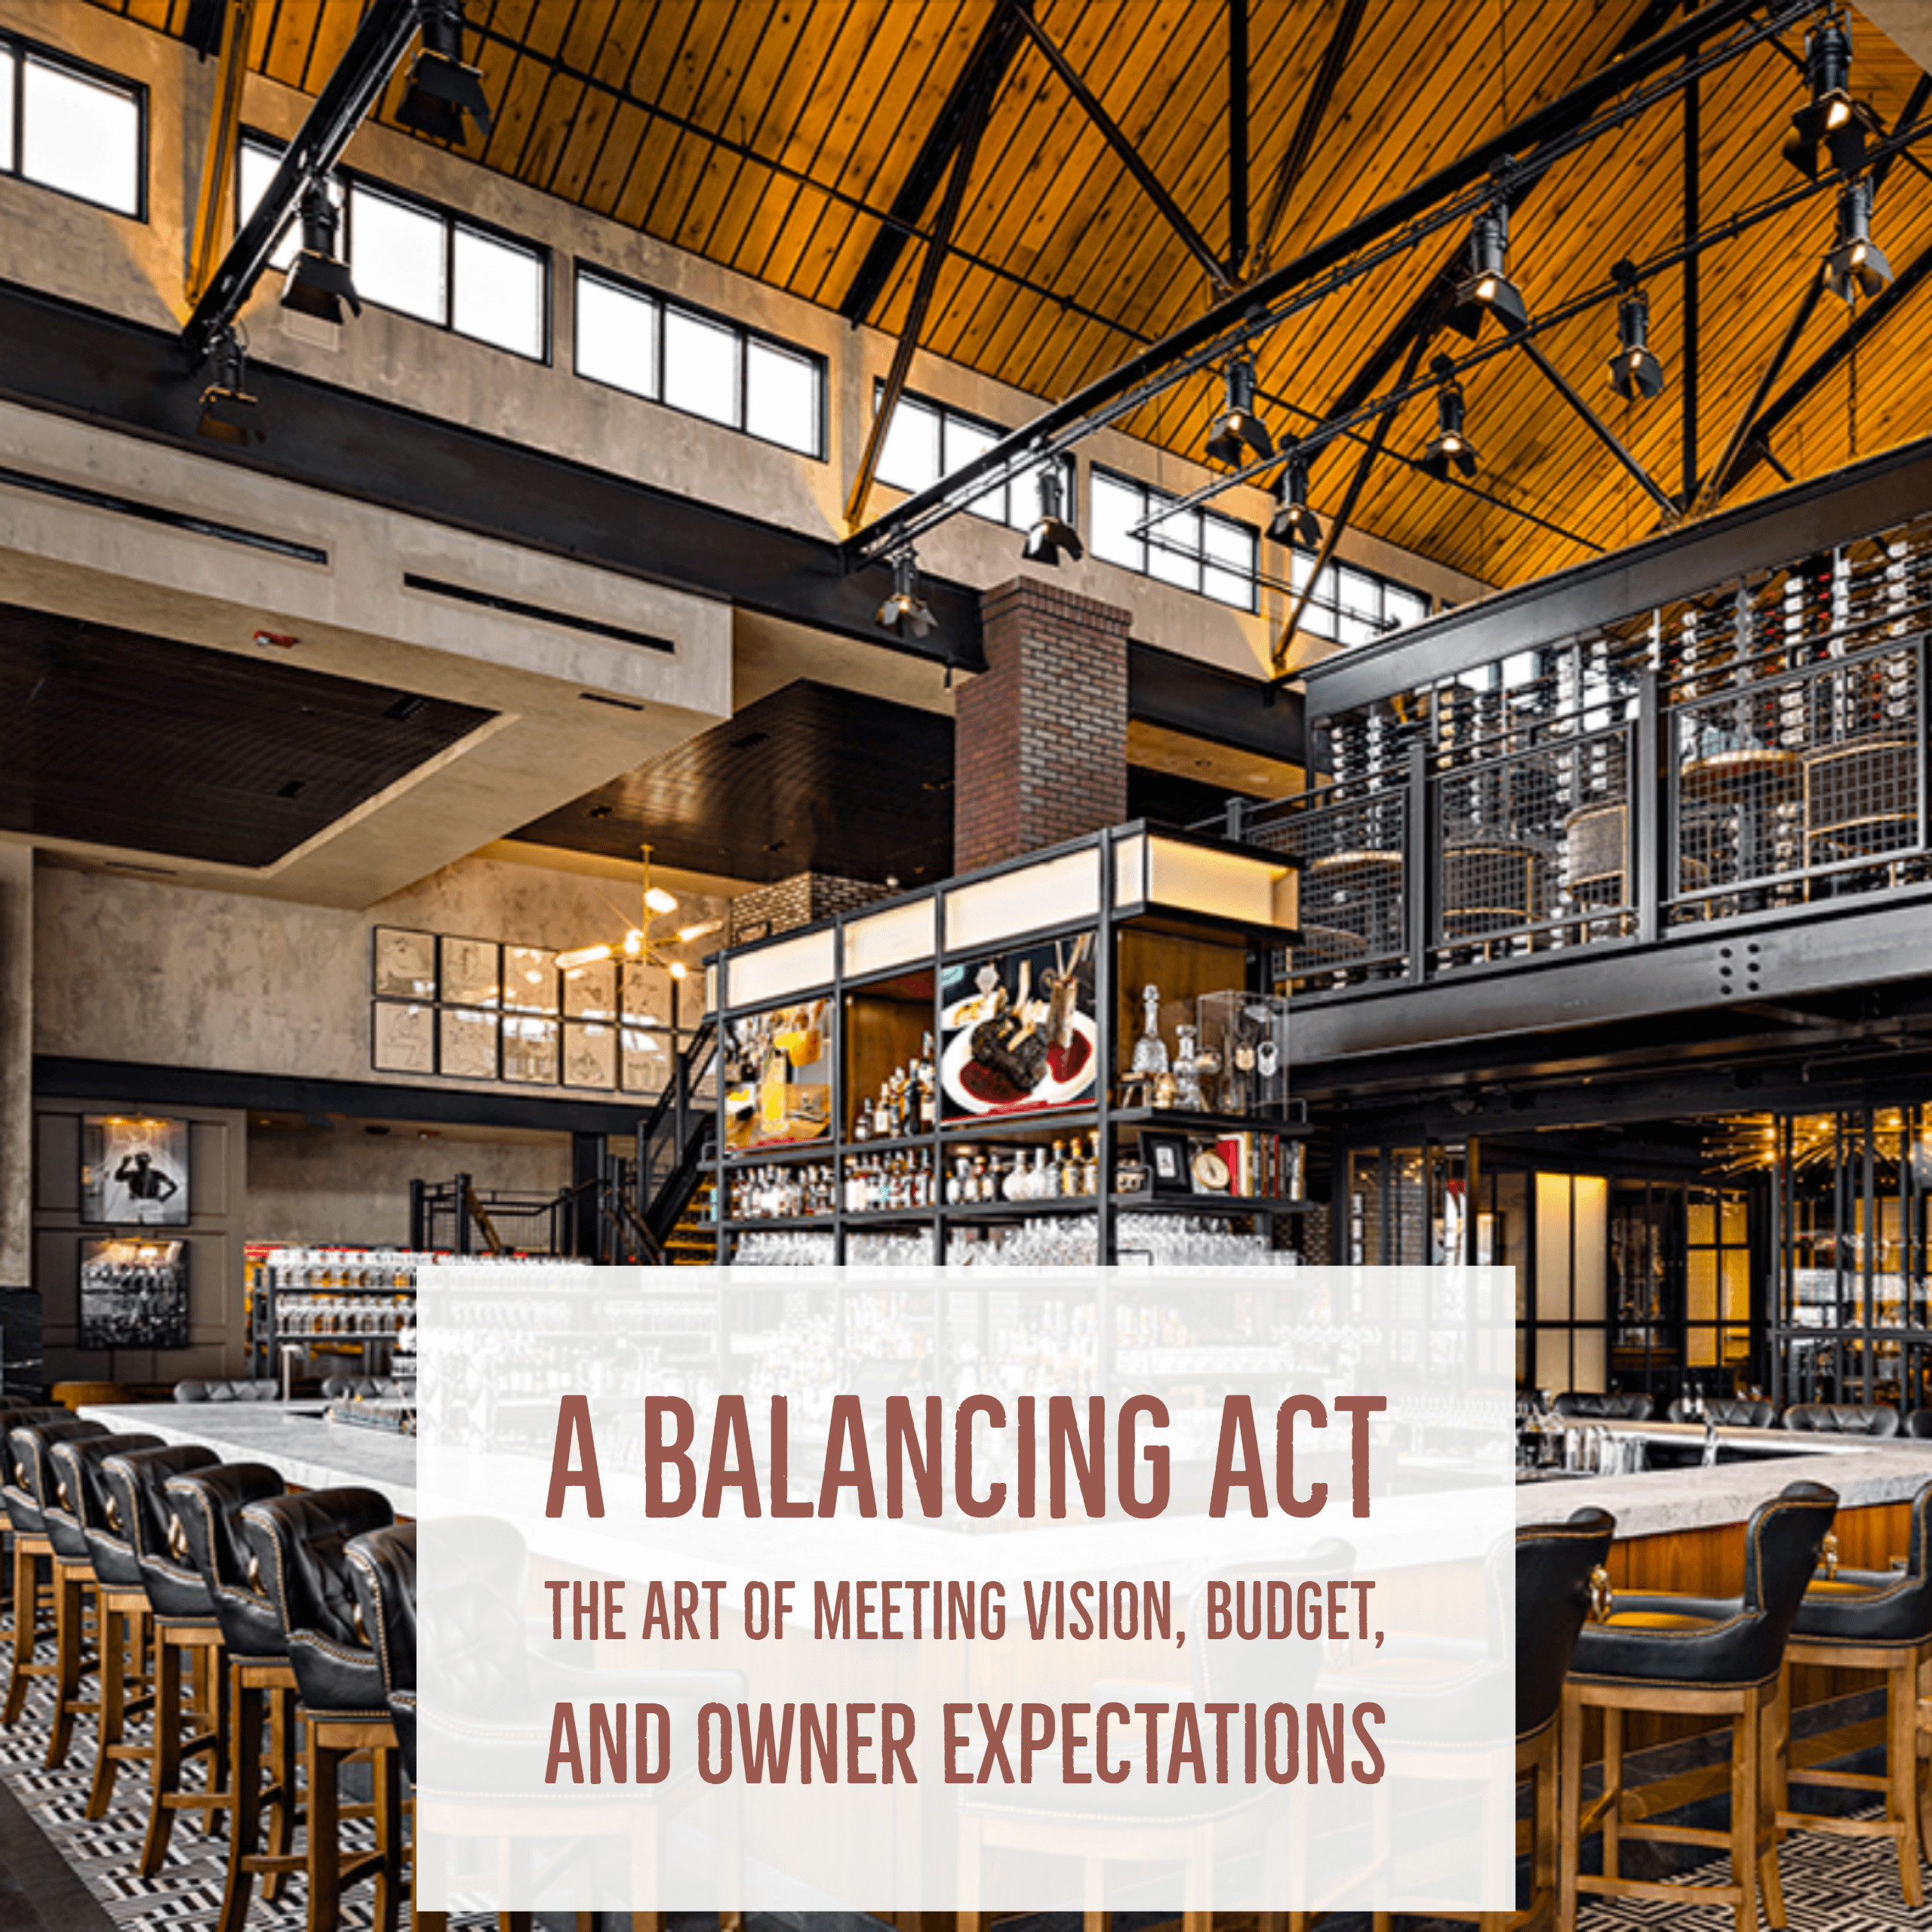 A Balancing Act: The Art of Restaurant Design and Construction